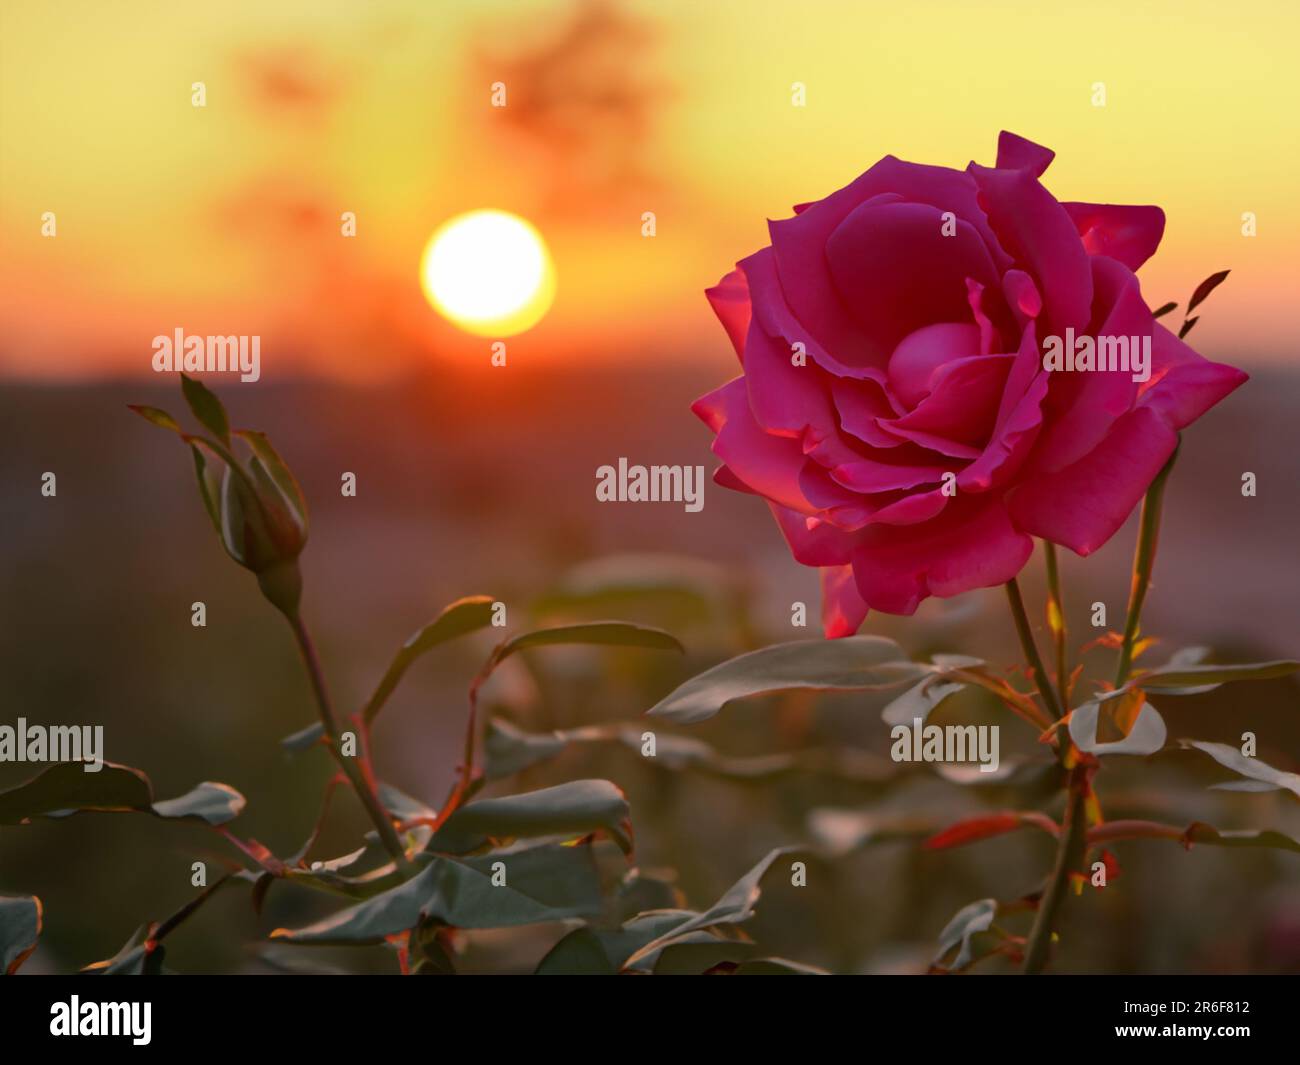 a single pink rose in front of a setting sun in a field. . Stock Photo